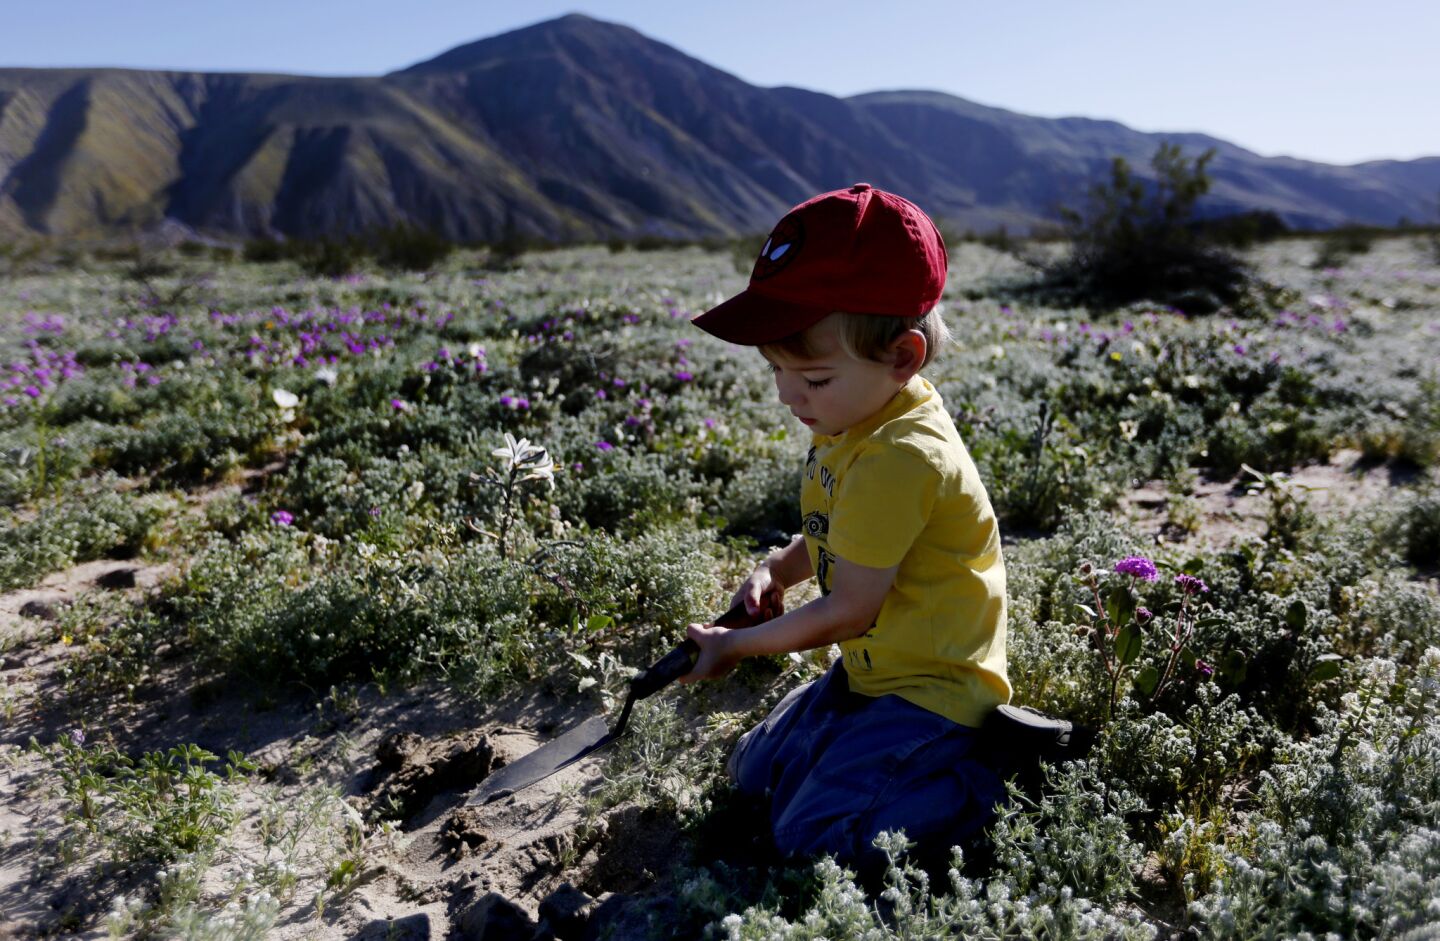 Ethan Greiner, 3, of Escondido, plays in the sand in the Anza-Borrego Desert State Park in San Diego County.